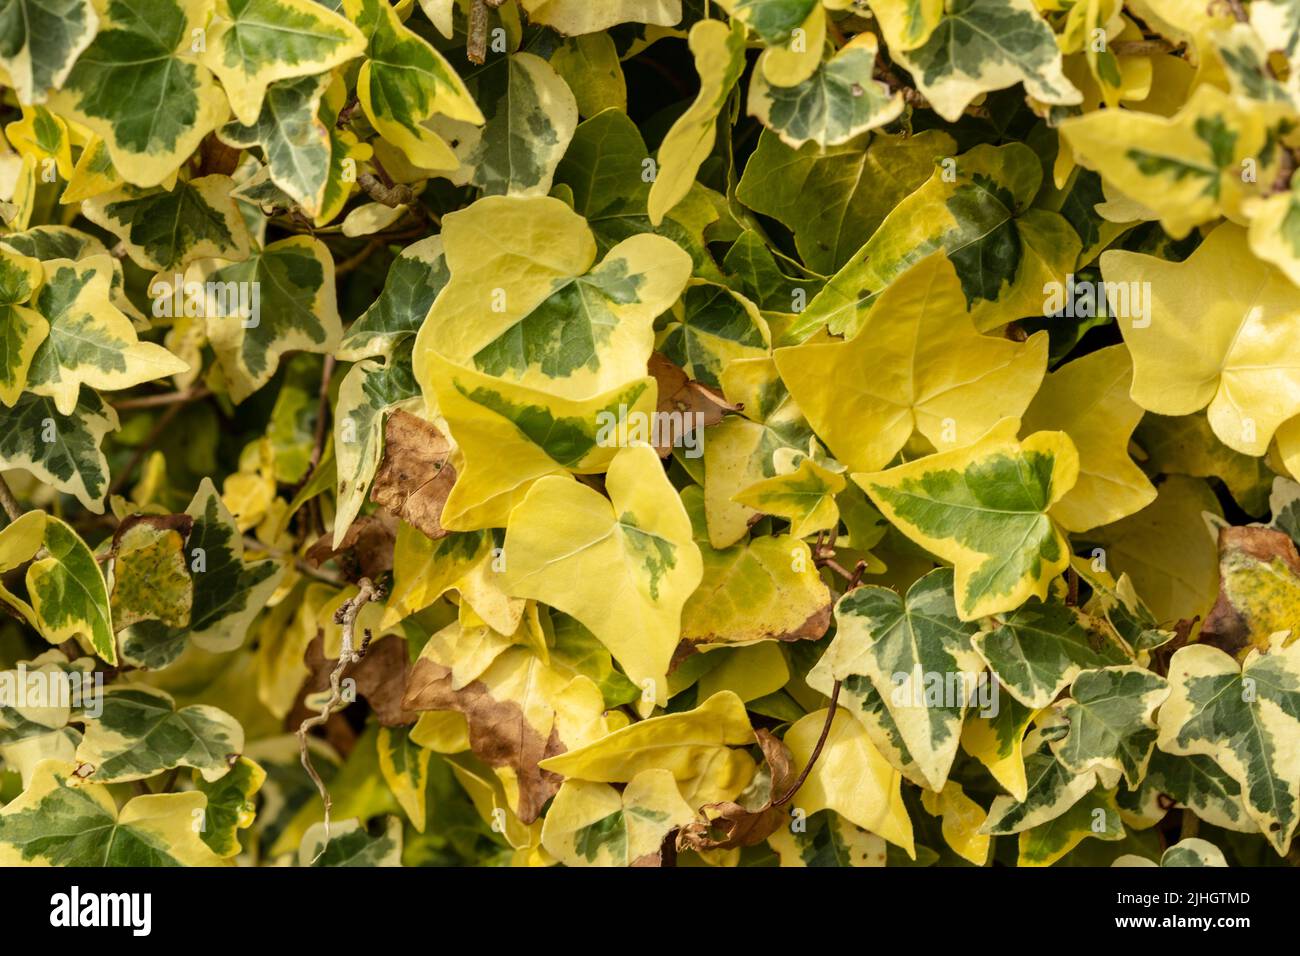 Close up natural plant portrait of Hedera Helix ‘Goldchild’, patterns and textures in the environment Stock Photo